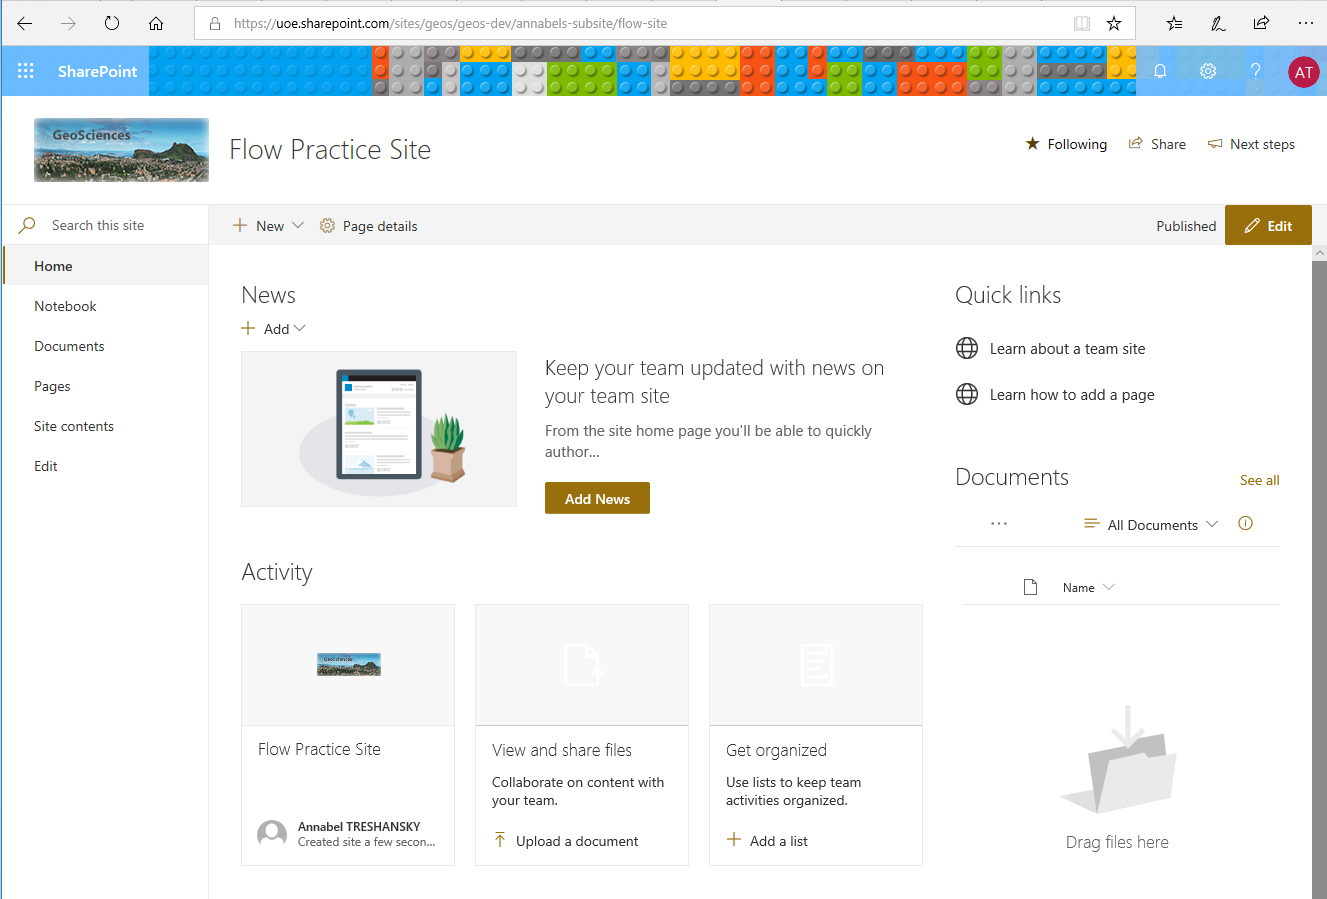 Home screen of the newly created SharePoint site